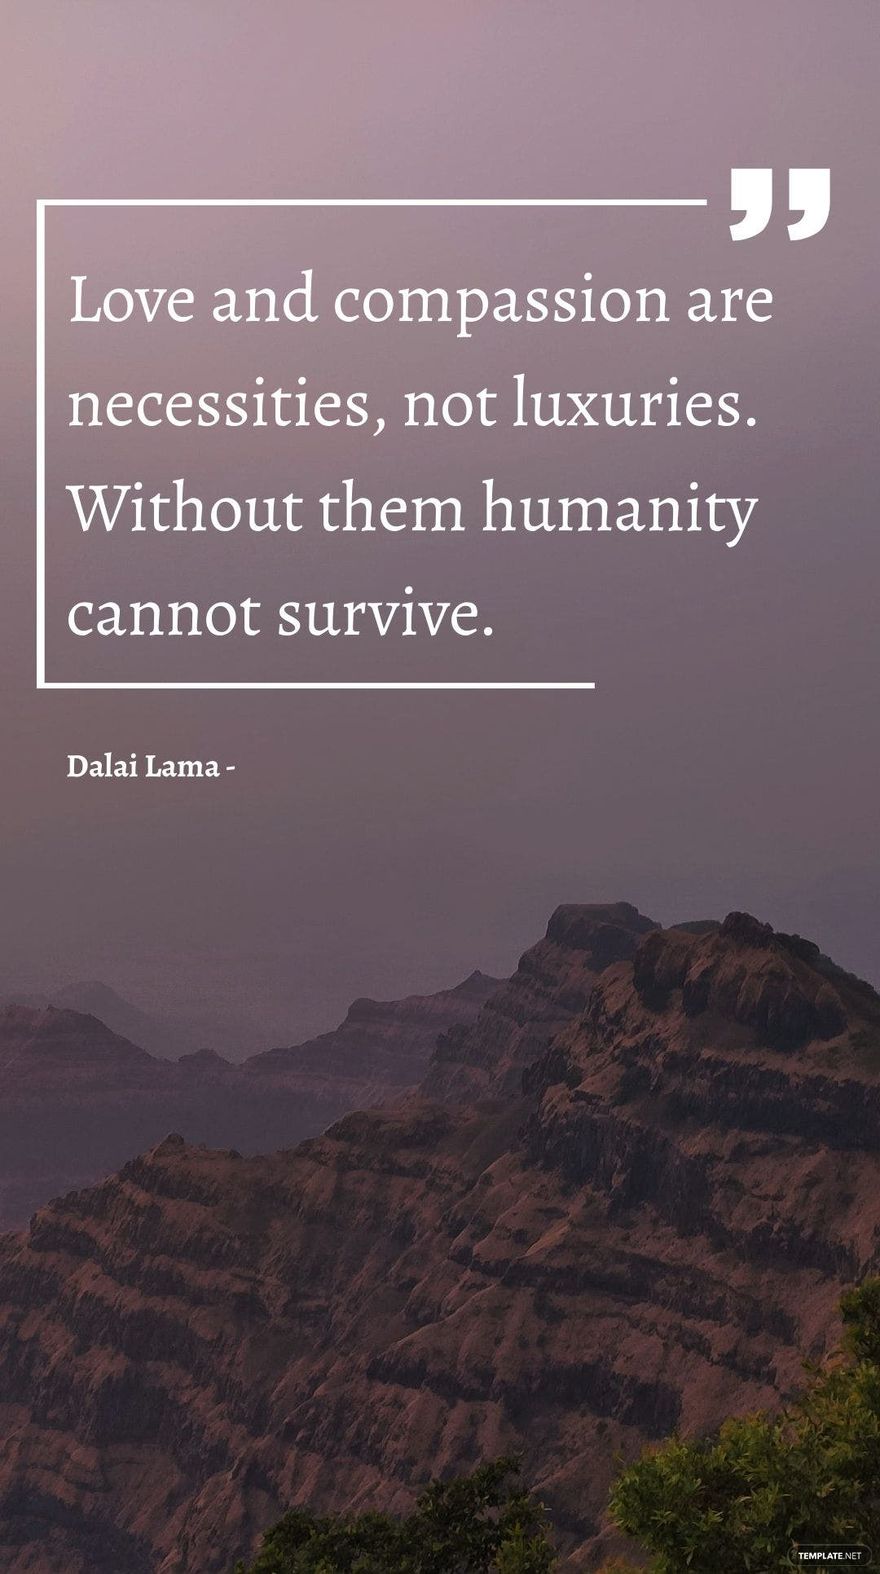 Dalai Lama - Love and compassion are necessities, not luxuries. Without them humanity cannot survive.